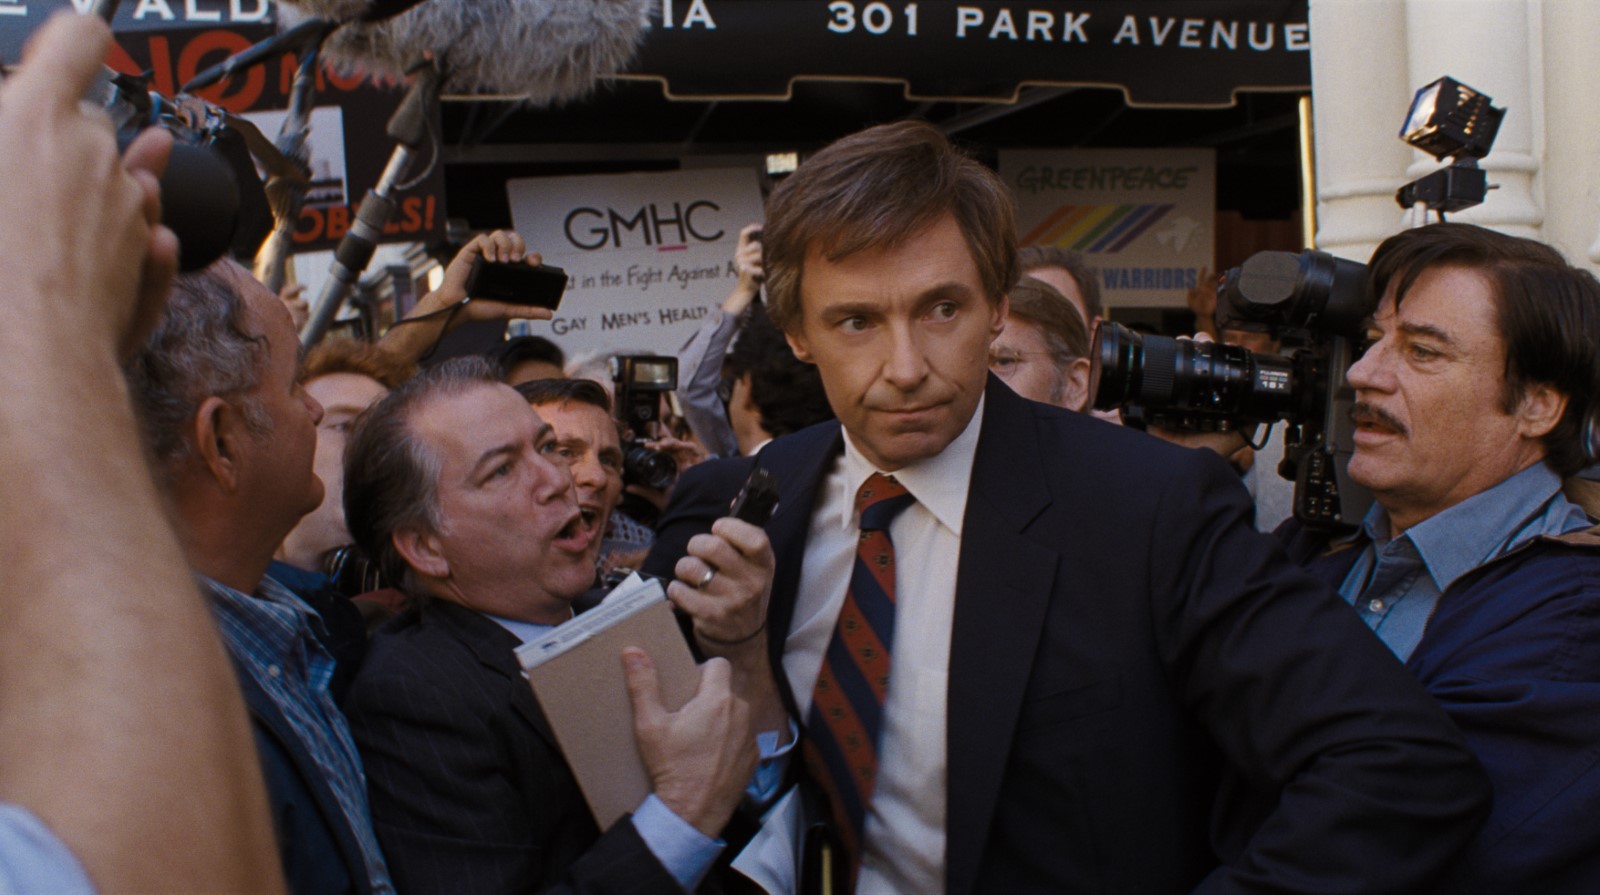 The Front Runner, Movie Reviews, Lucas Mirabella